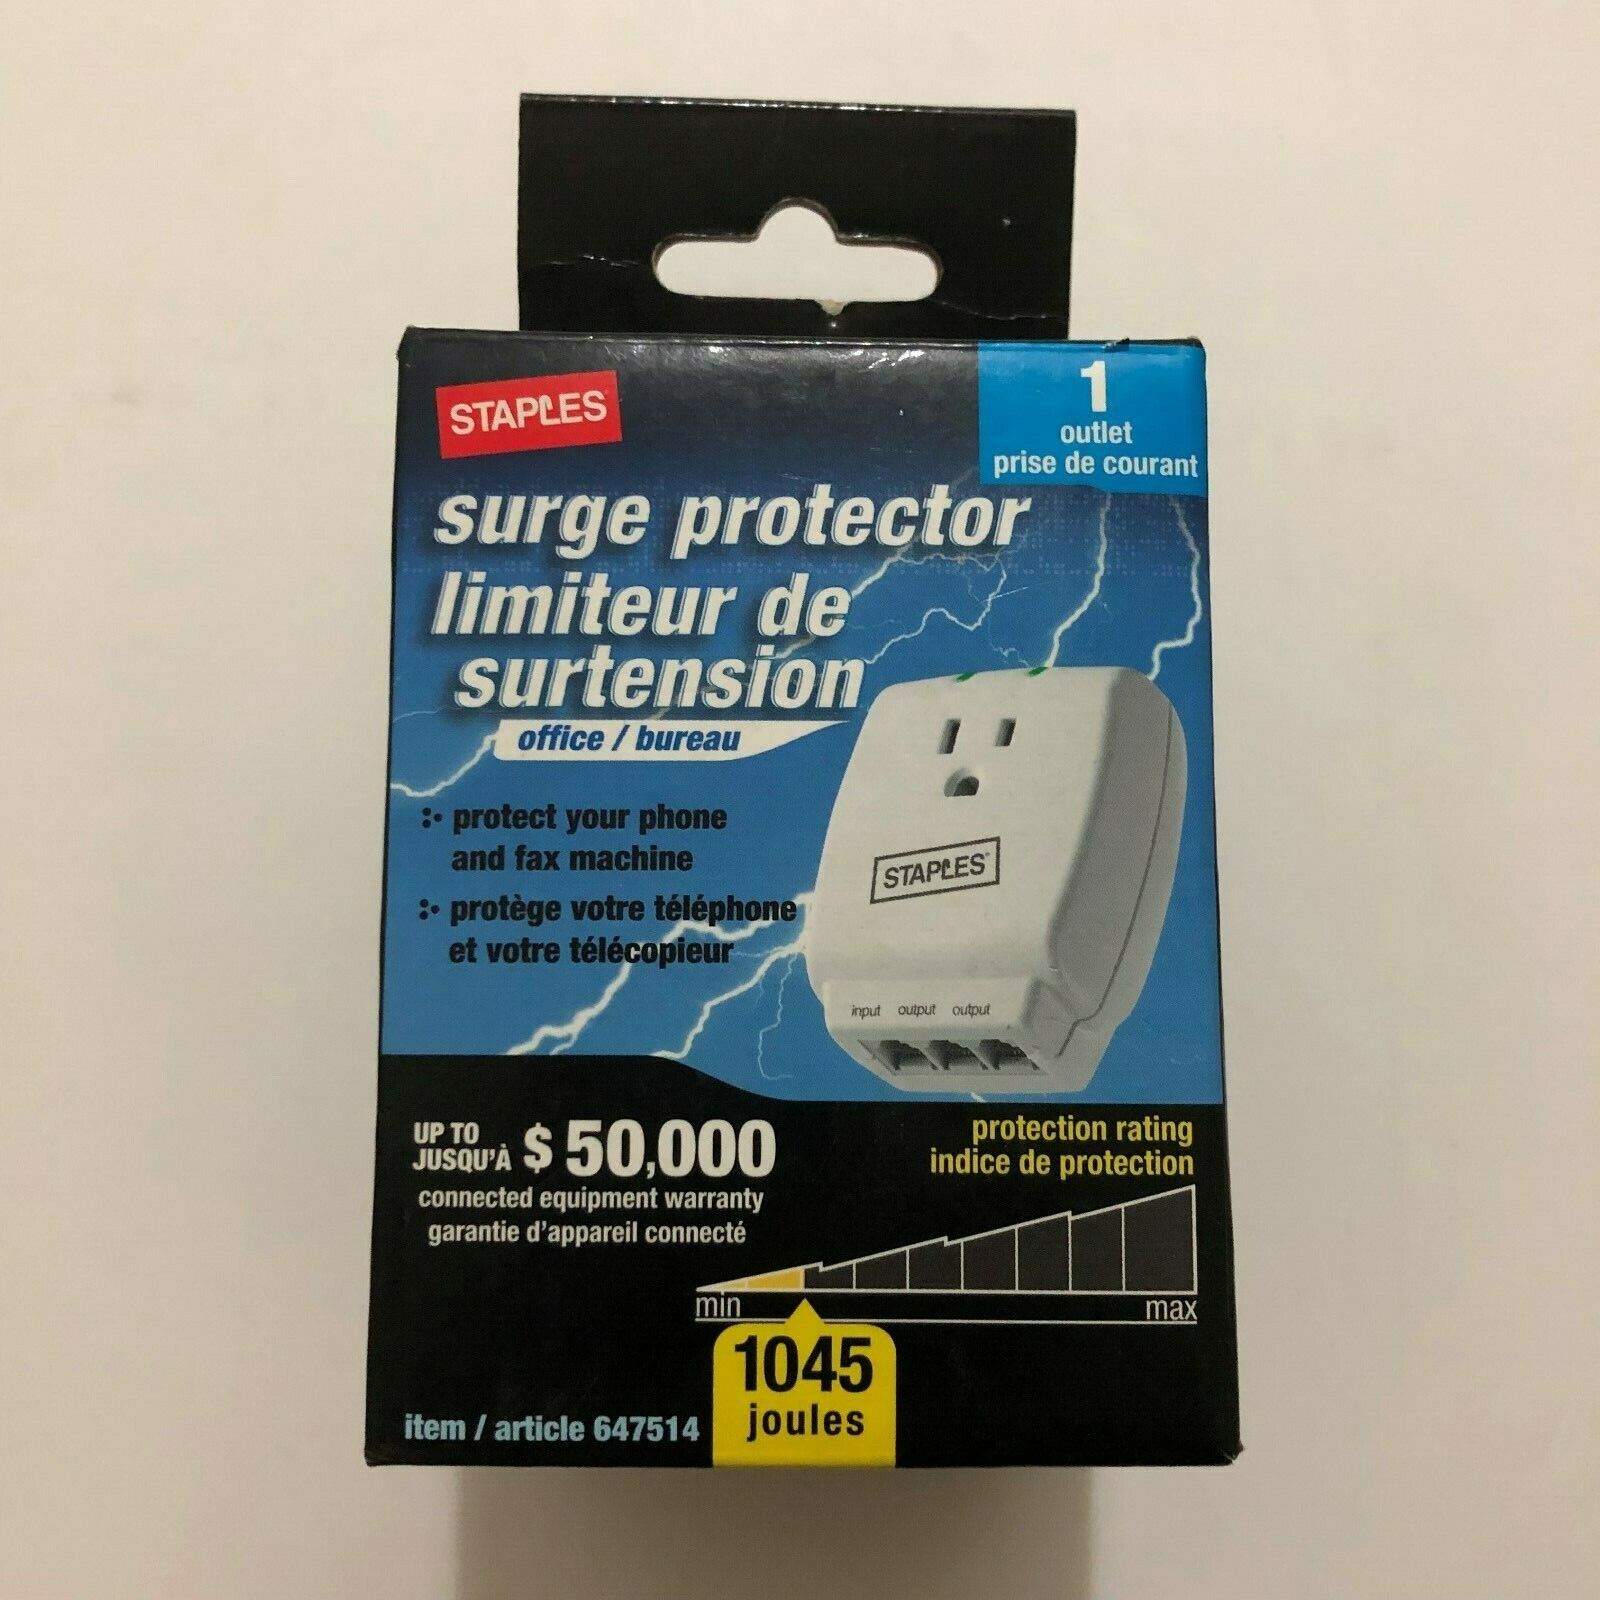 NEW STAPLES SINGLE OUTLET 1045 J OFFICE PHONE FAX MODEM SURGE PROTECTOR 647514